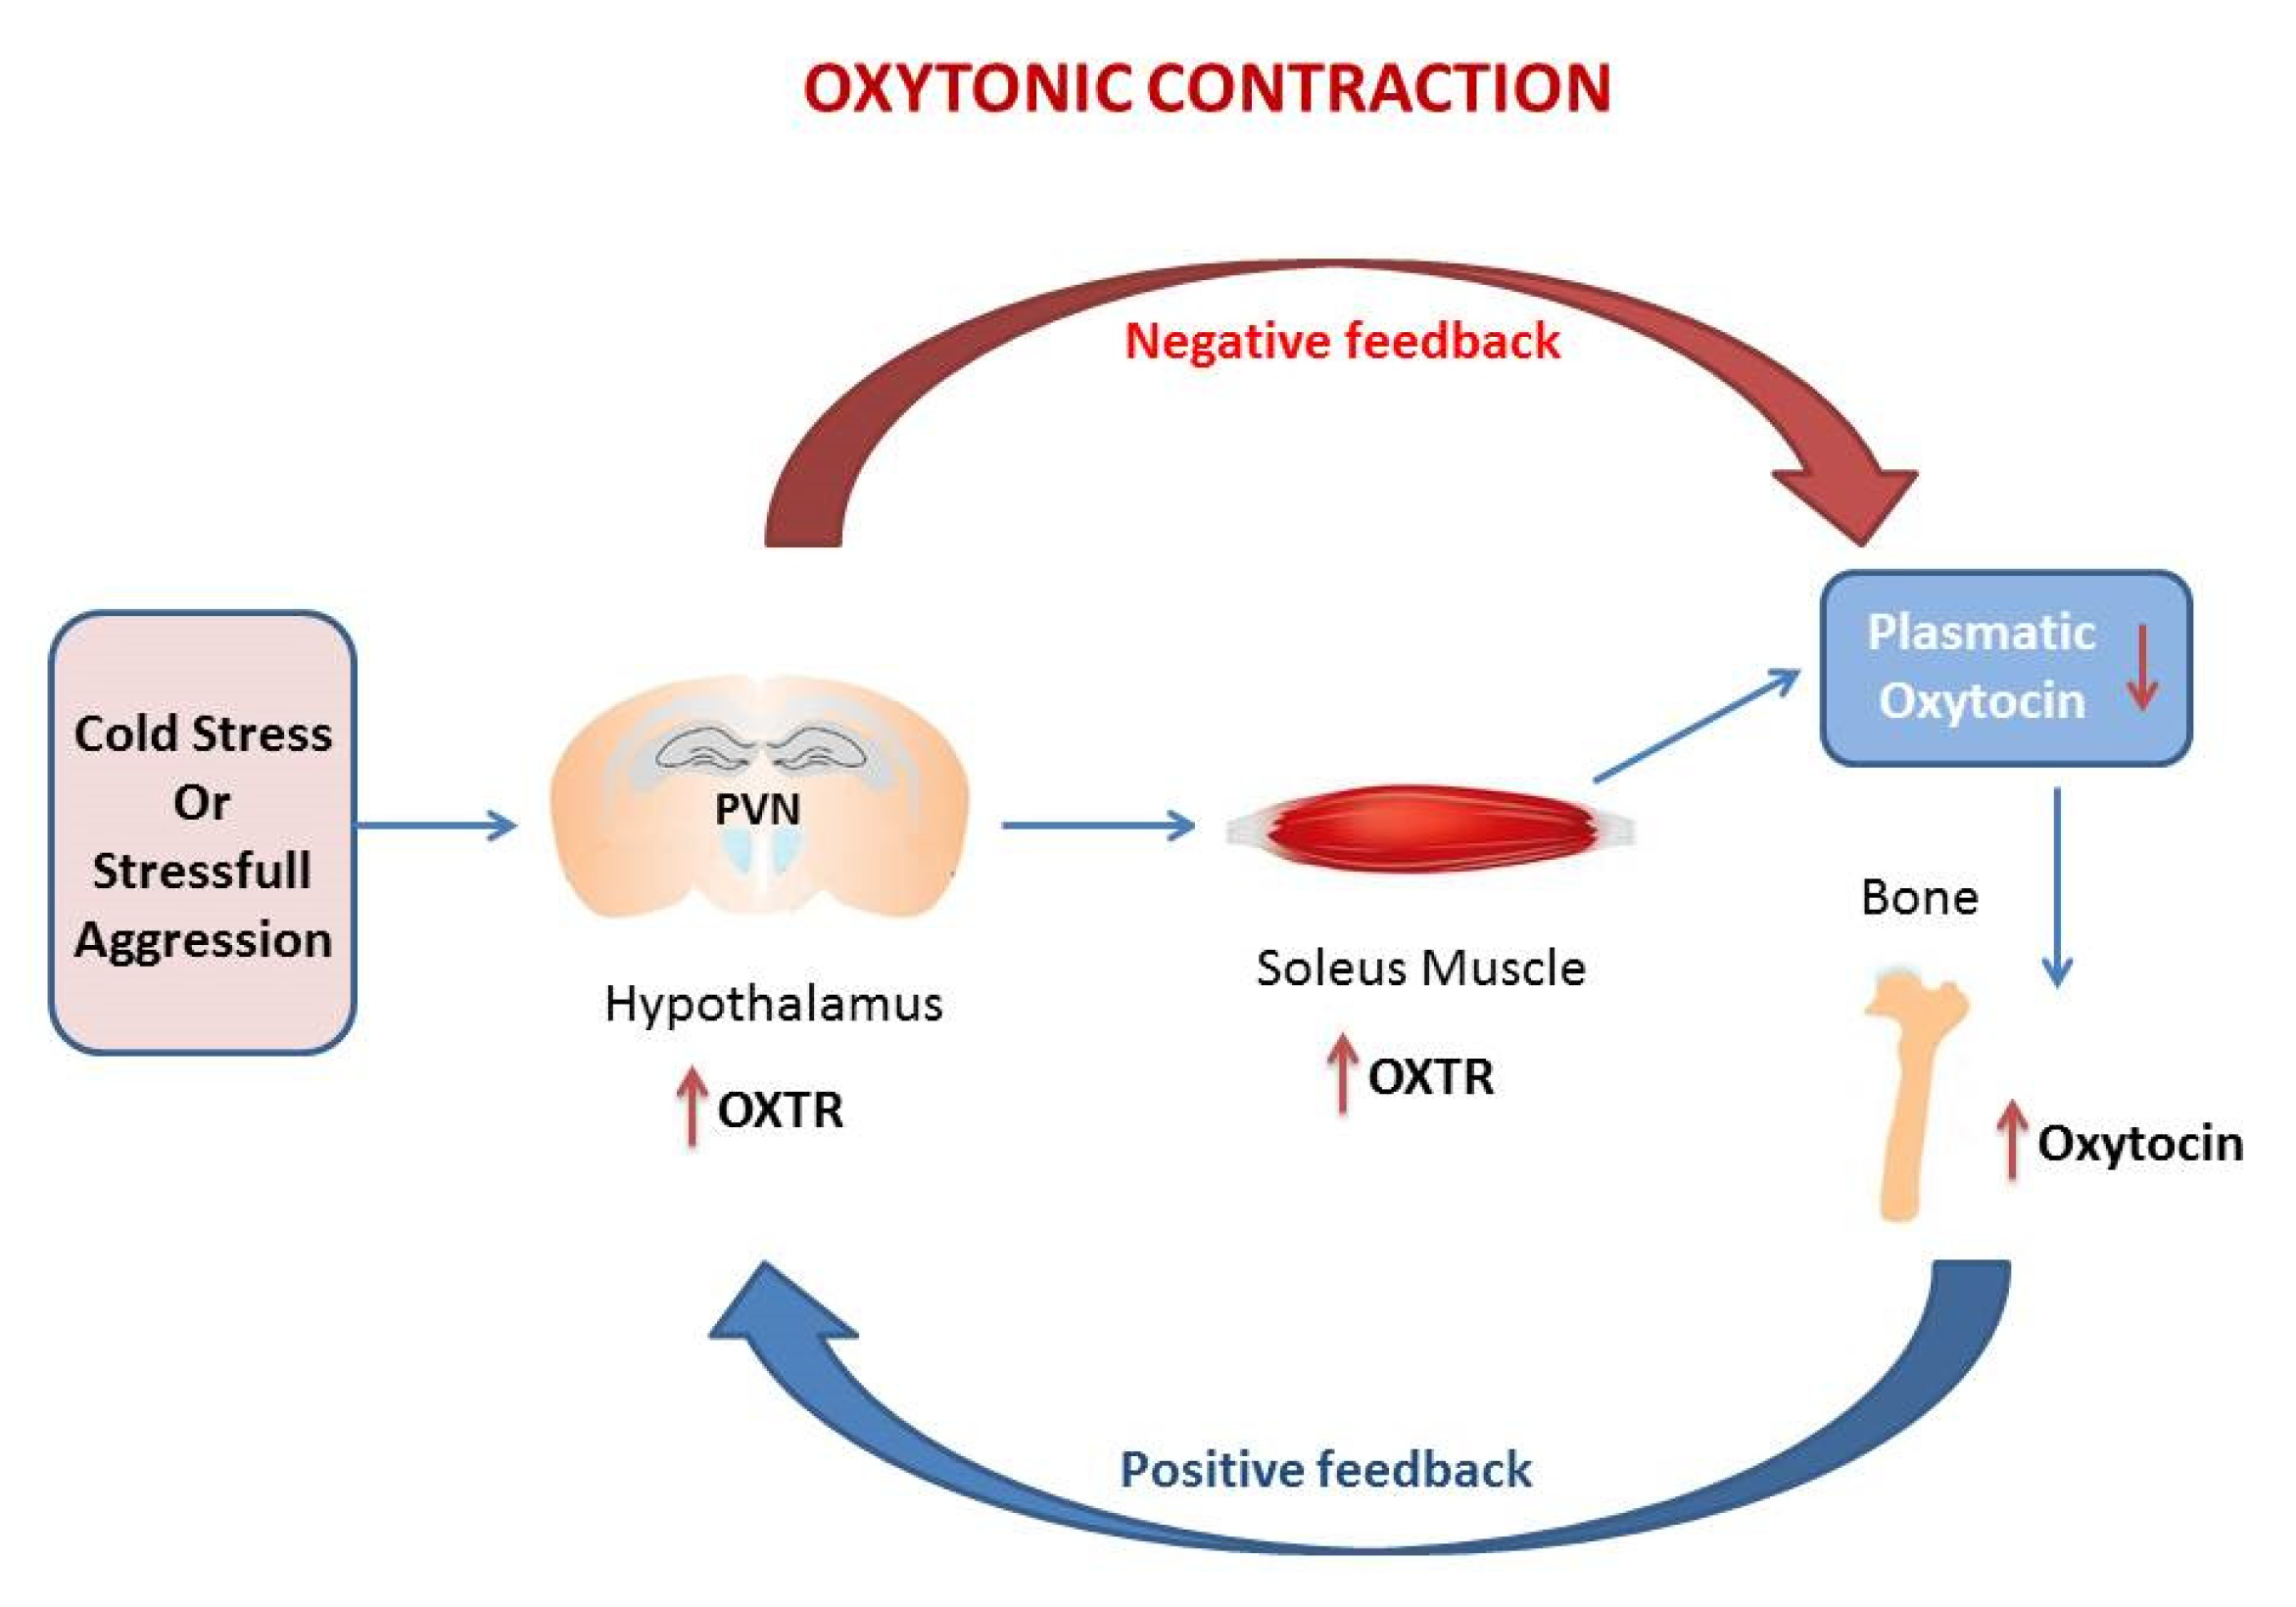 IJMS | Free Full-Text | The New Frontier in Oxytocin Physiology: The Oxytonic Contraction